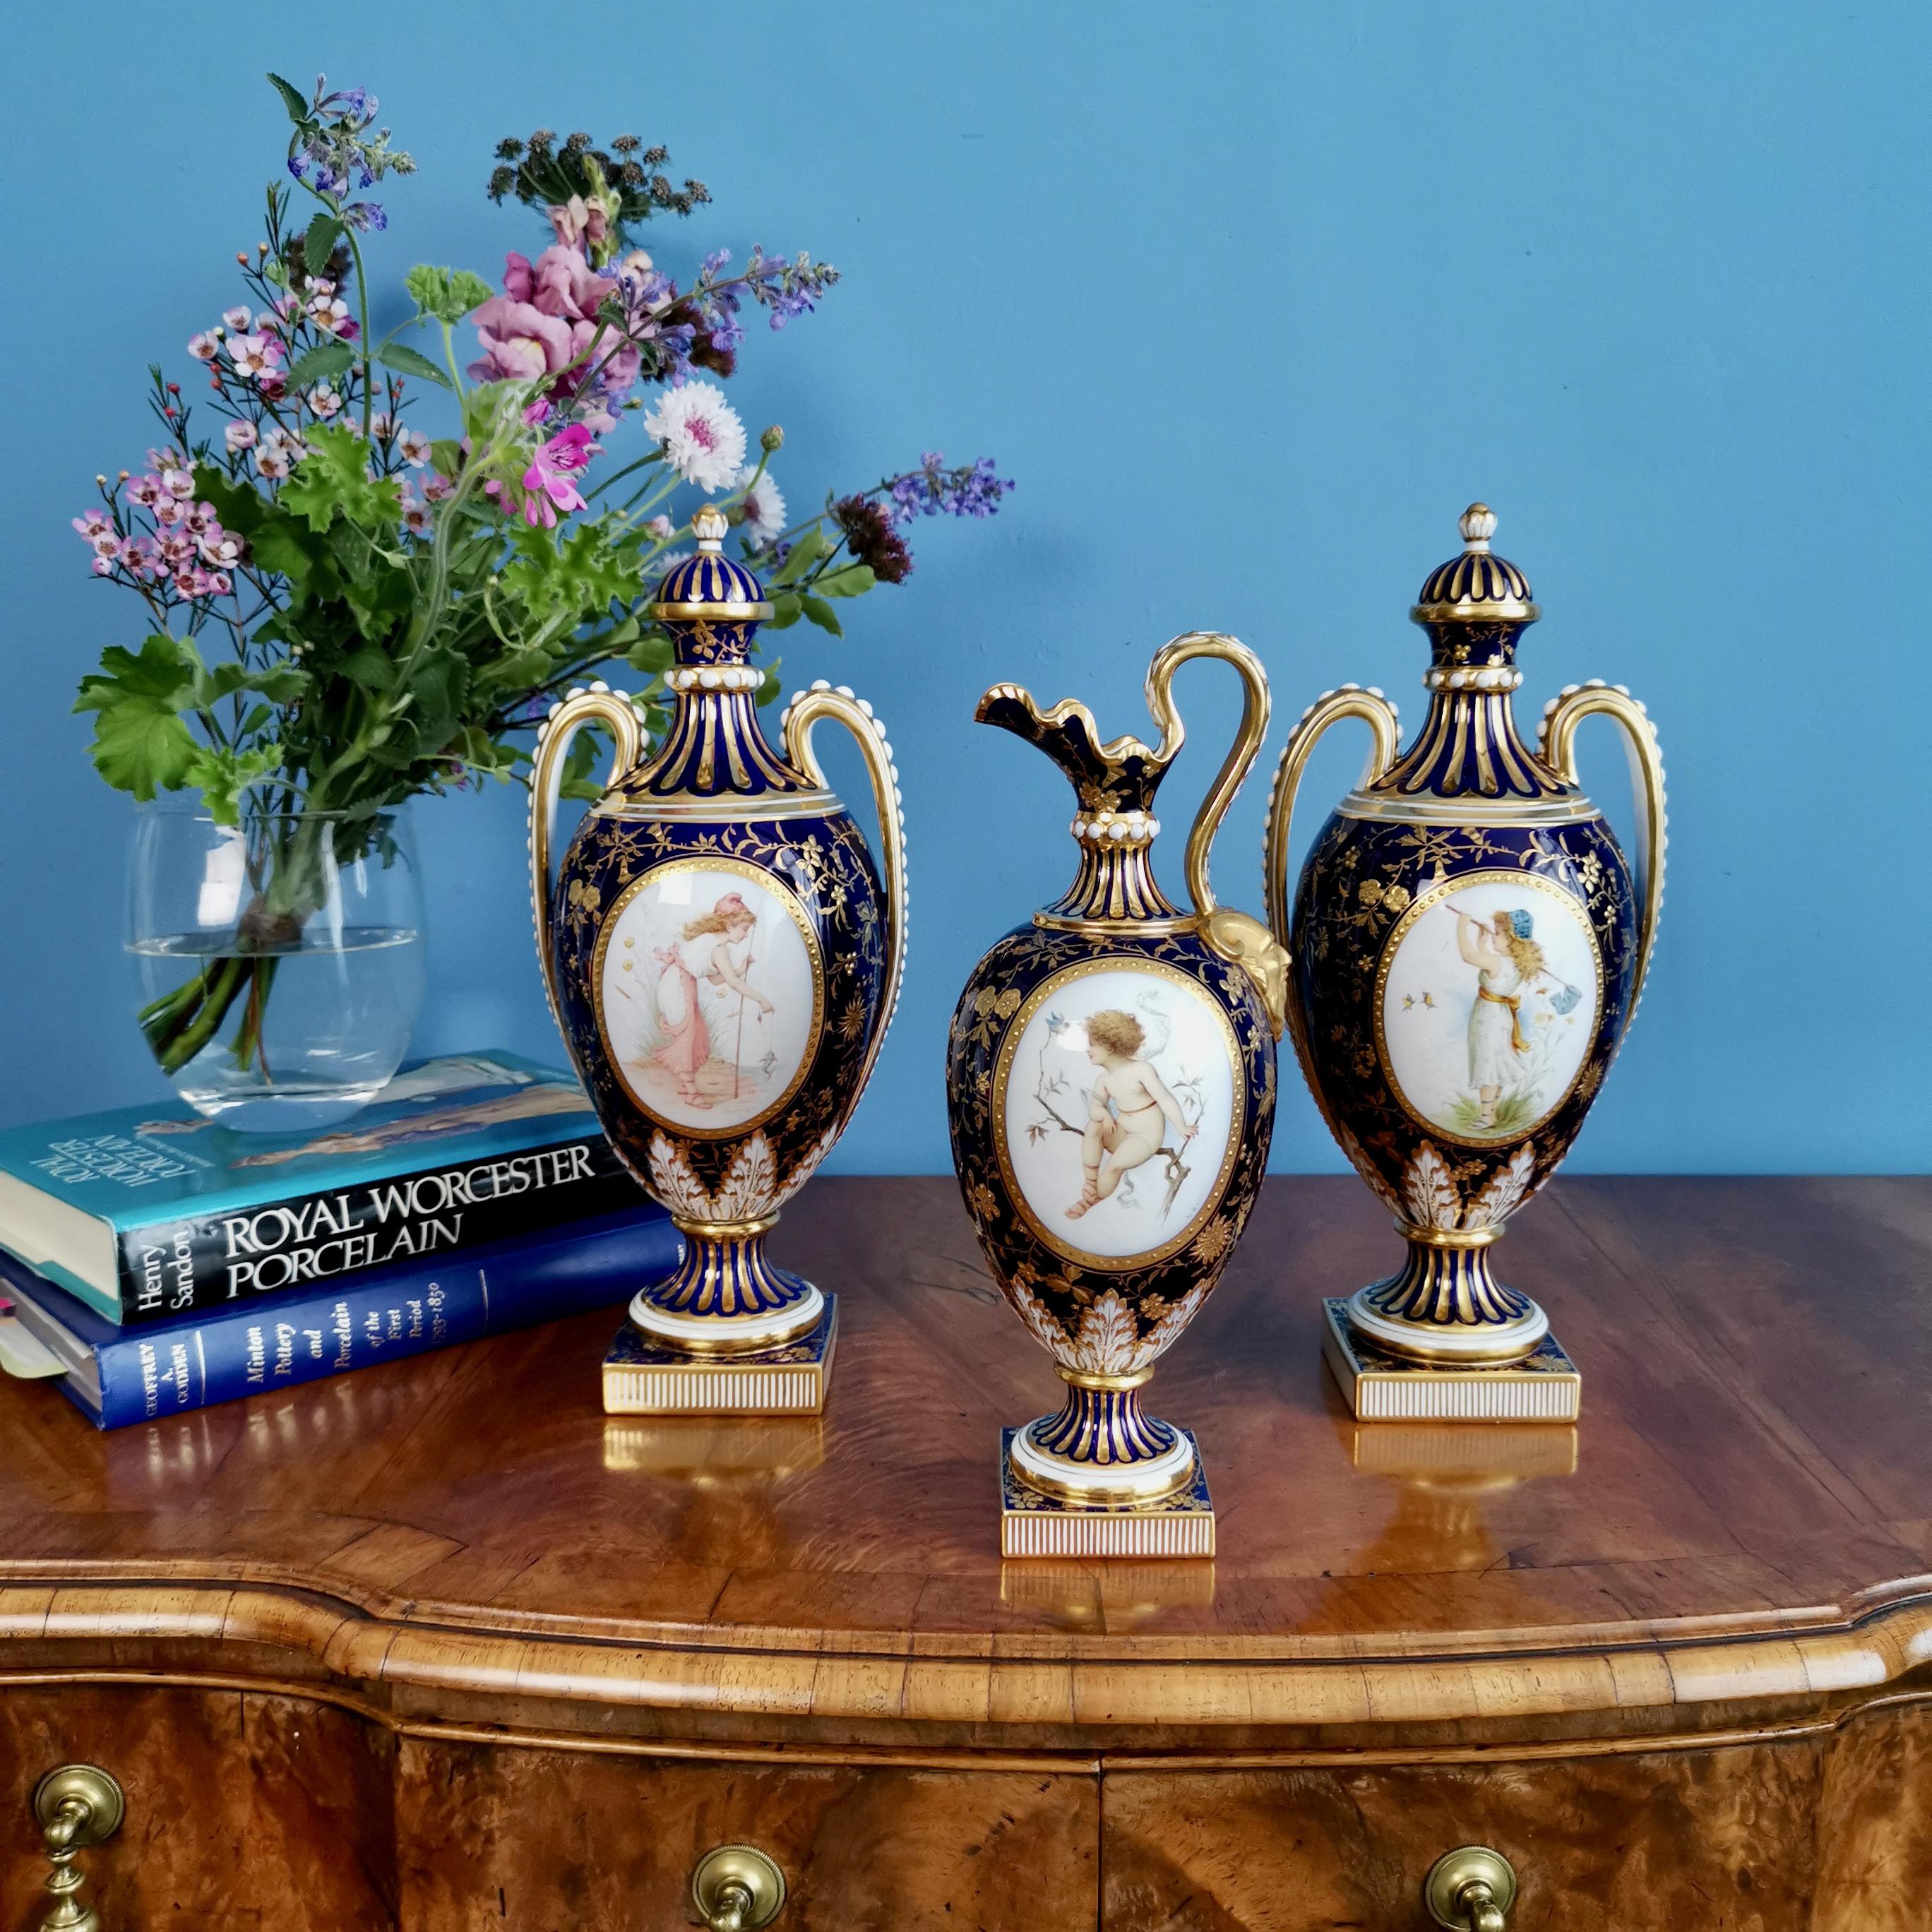 This is a stunning garniture consisting of two lidded vases and a ewer, made by Minton in 1891 and painted by the famous porcelain artist Antonin Boullemier.

Minton was one of the pioneers of English china production alongside other great potters